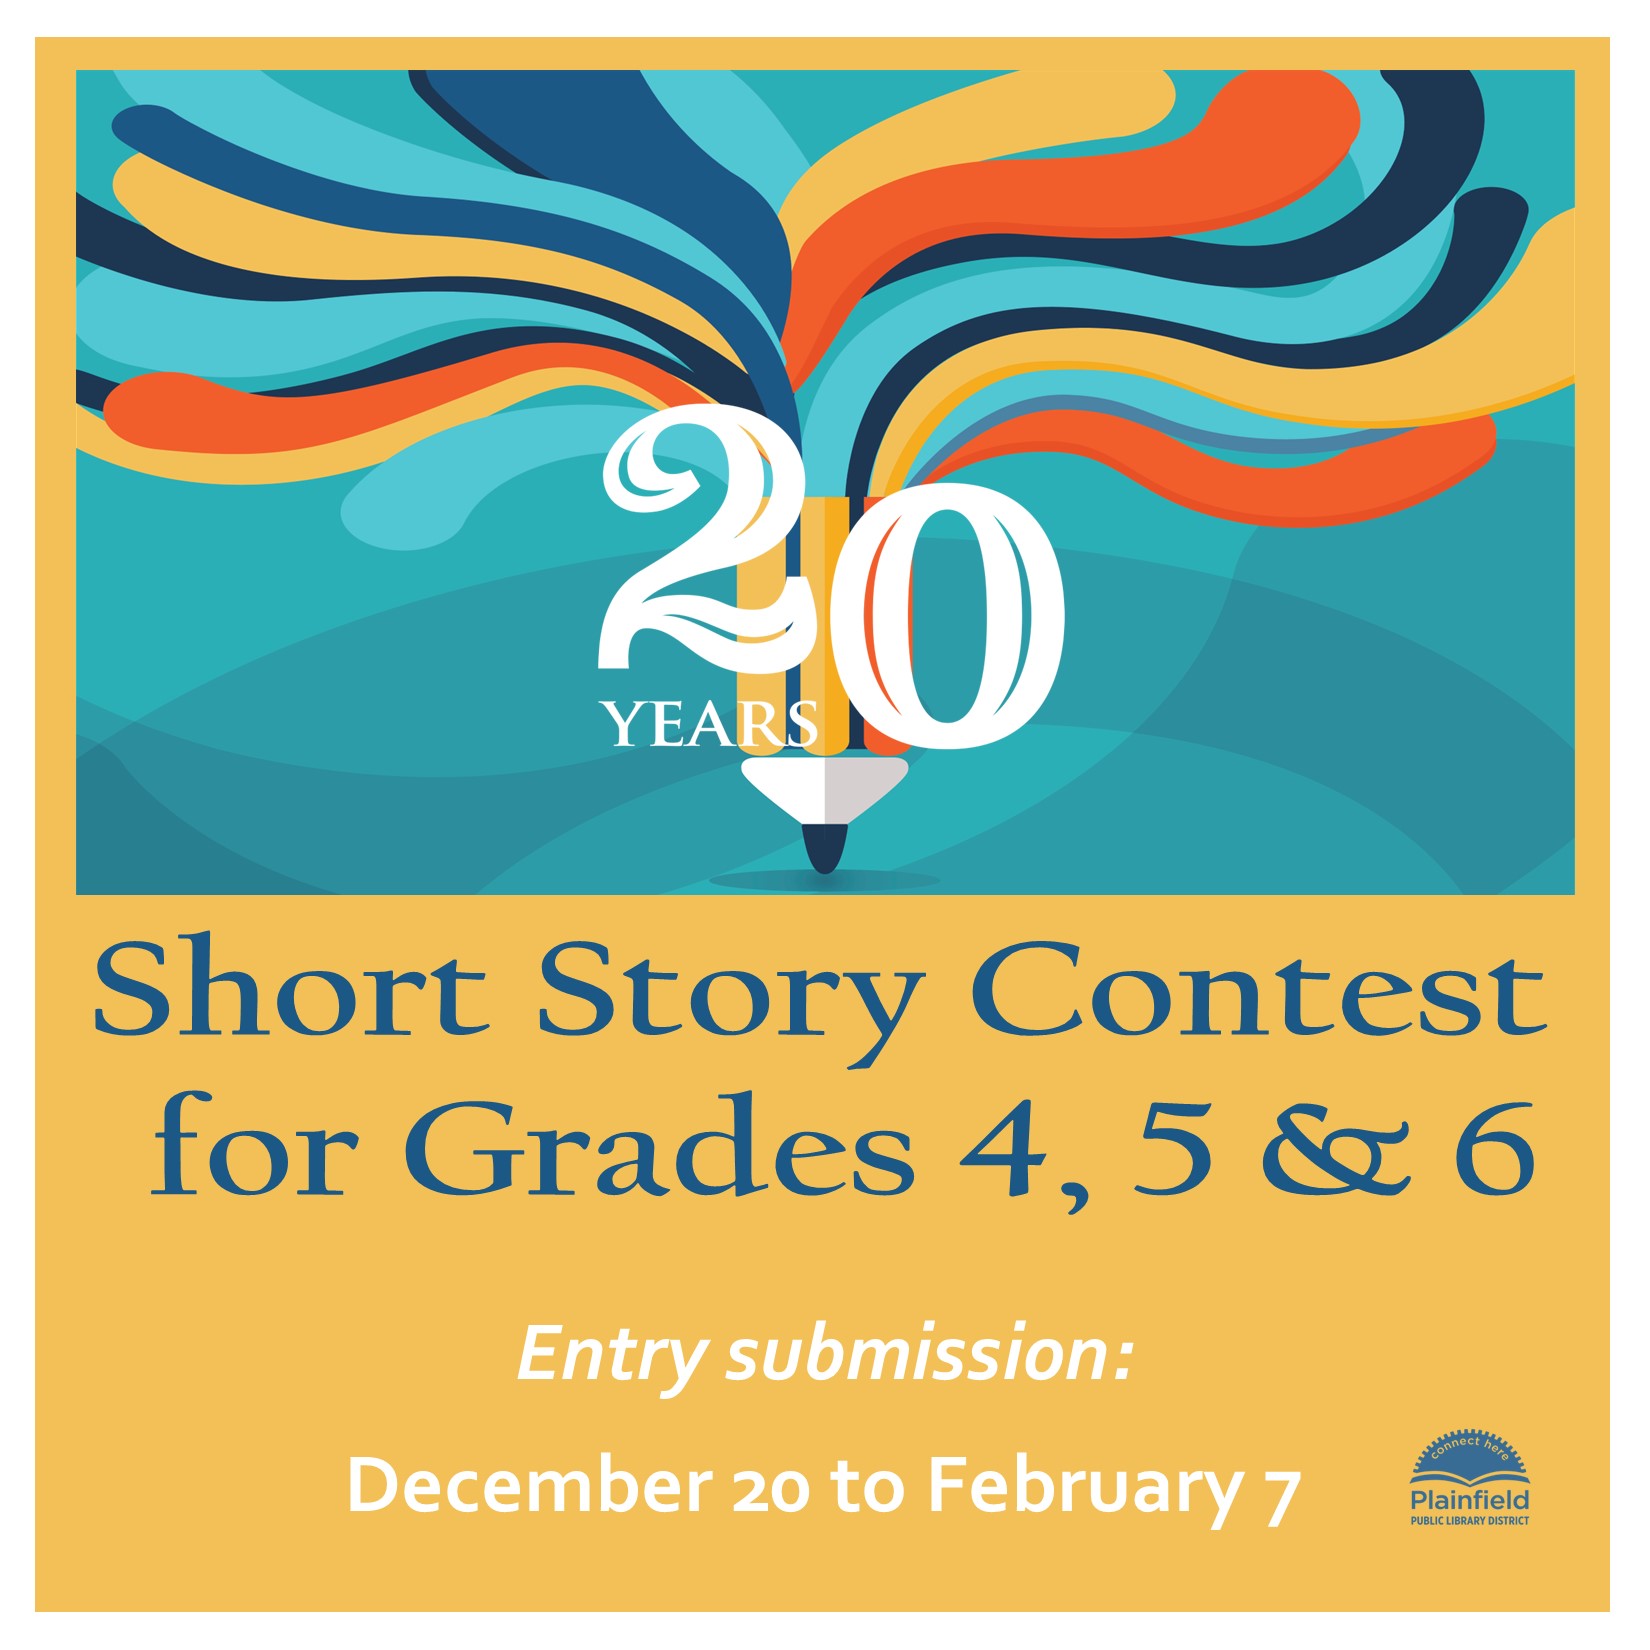 Short Story Contest Grades 4, 5 & 6 Entries 12/20 to 2/7